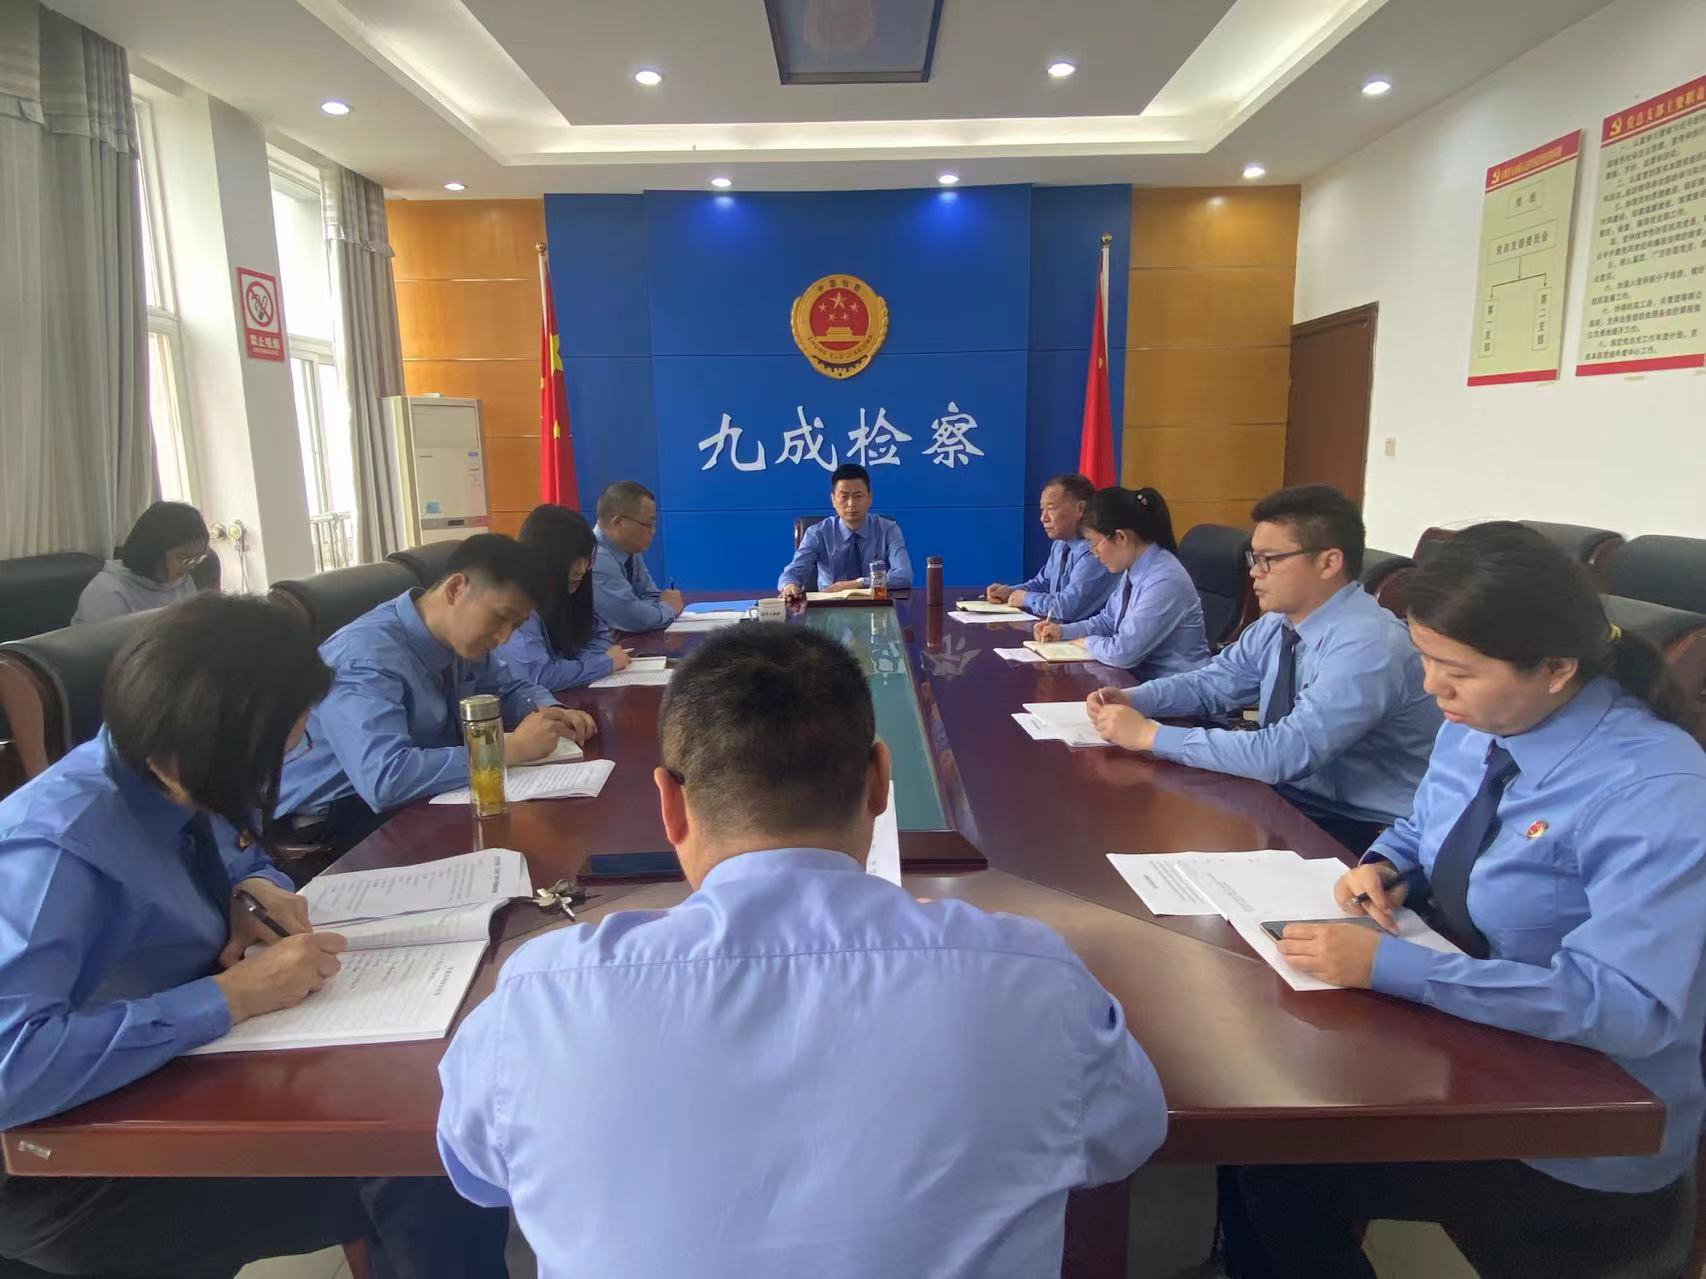  Inheriting the spirit of the May 4th Movement and striving to be a pioneer in performing duties -- Jiuchengban Institute held the May 4th Youth Forum